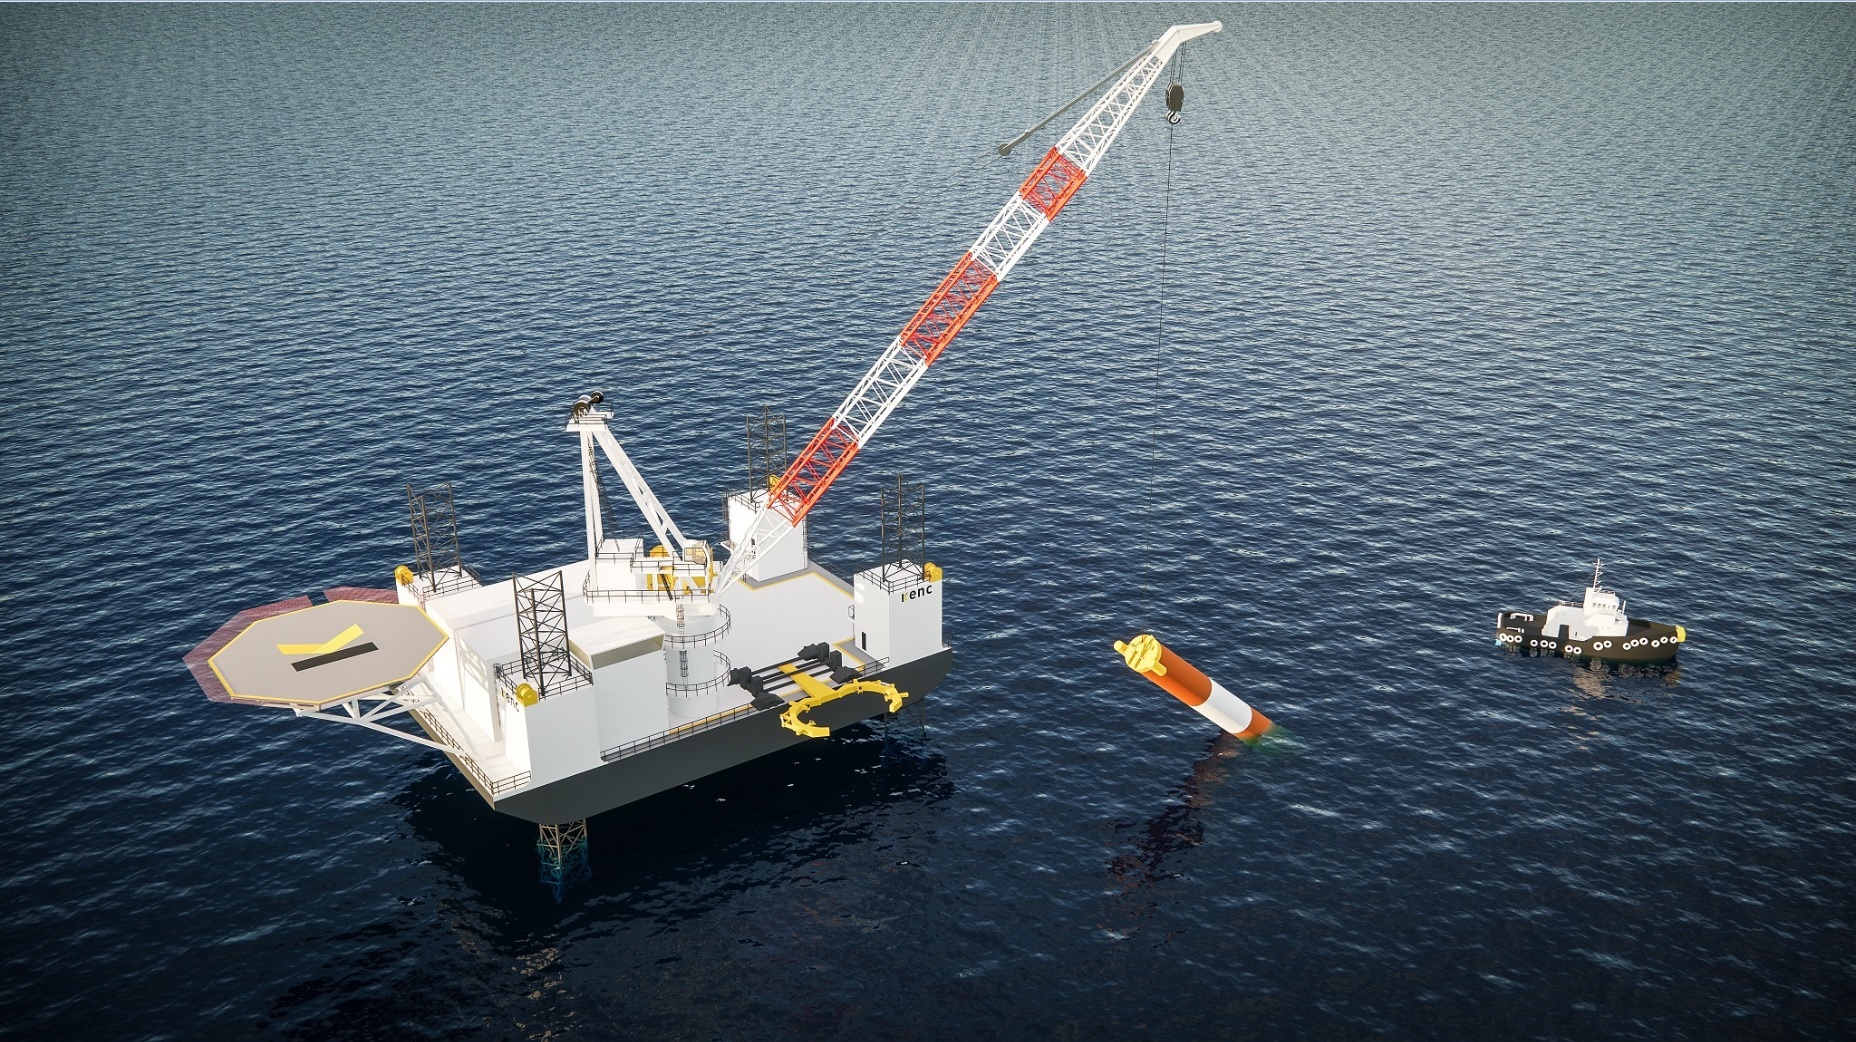 KENC RECEIVES CONTRACT FOR DESIGN AND BUILD OF LIFTING FRAME FOR US OFFSHORE WIND PROJECTS